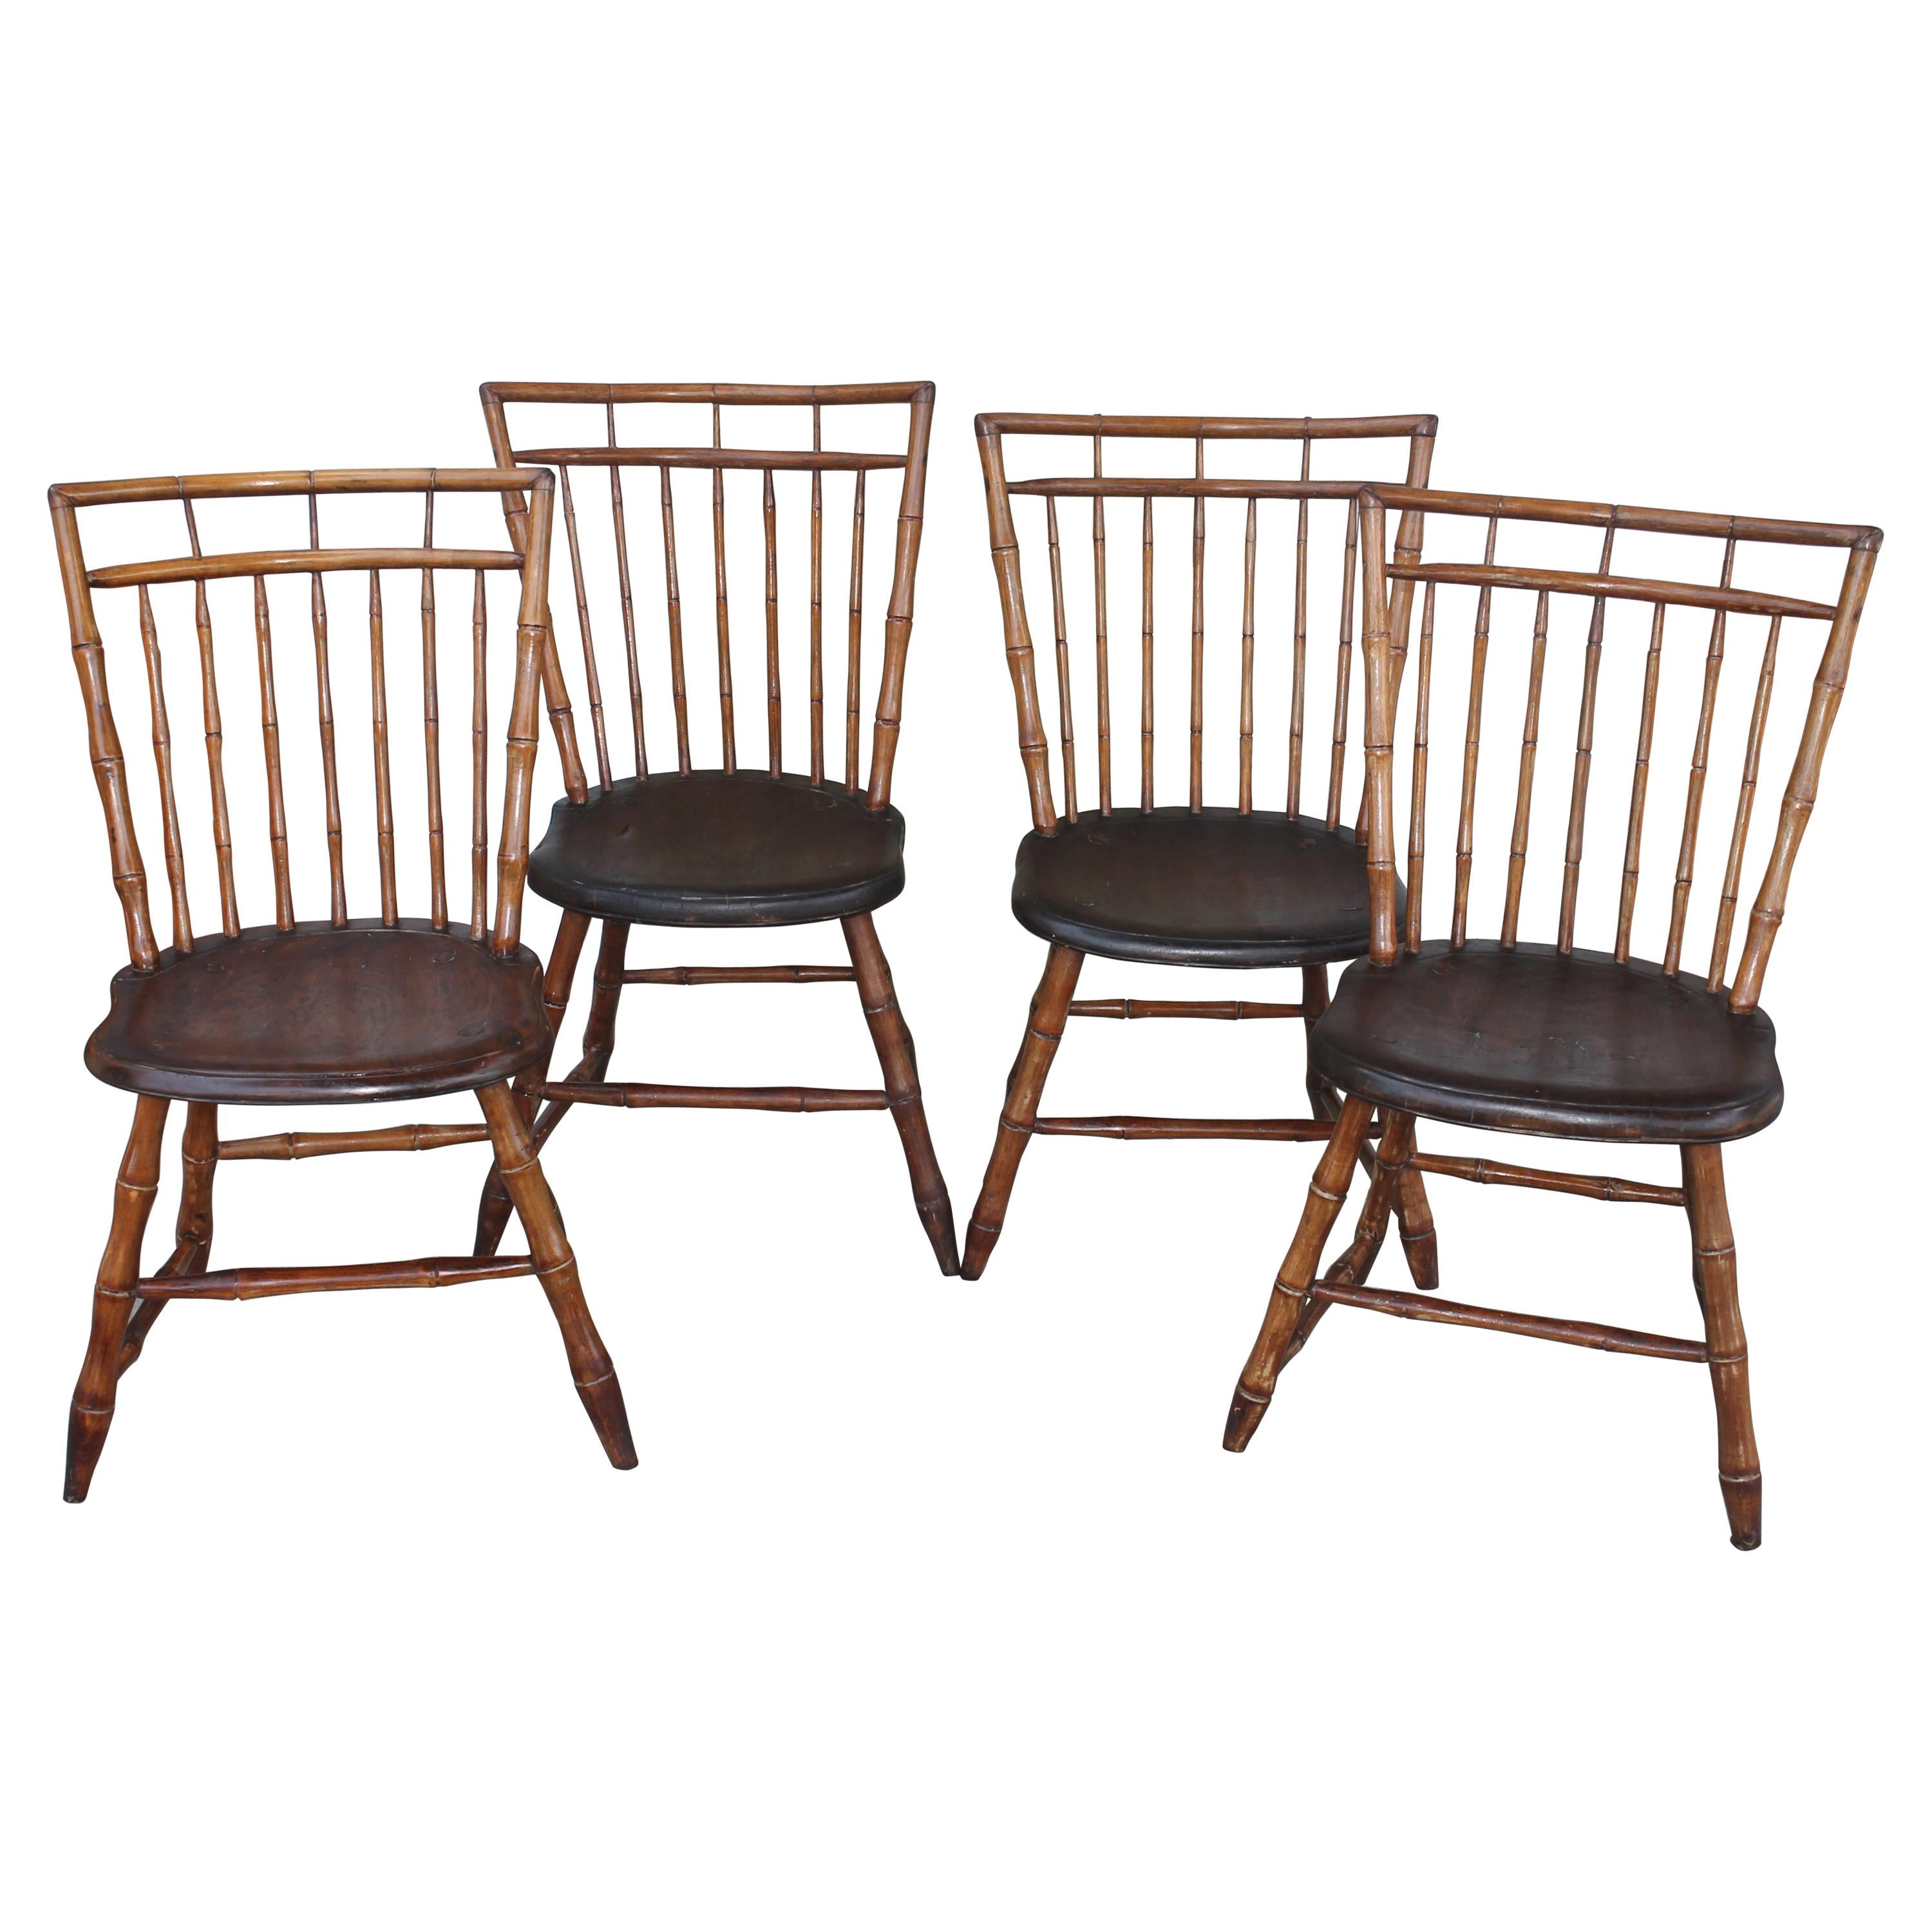 19th Century Bird Cage Windsor Chairs from Pennsylvania -4